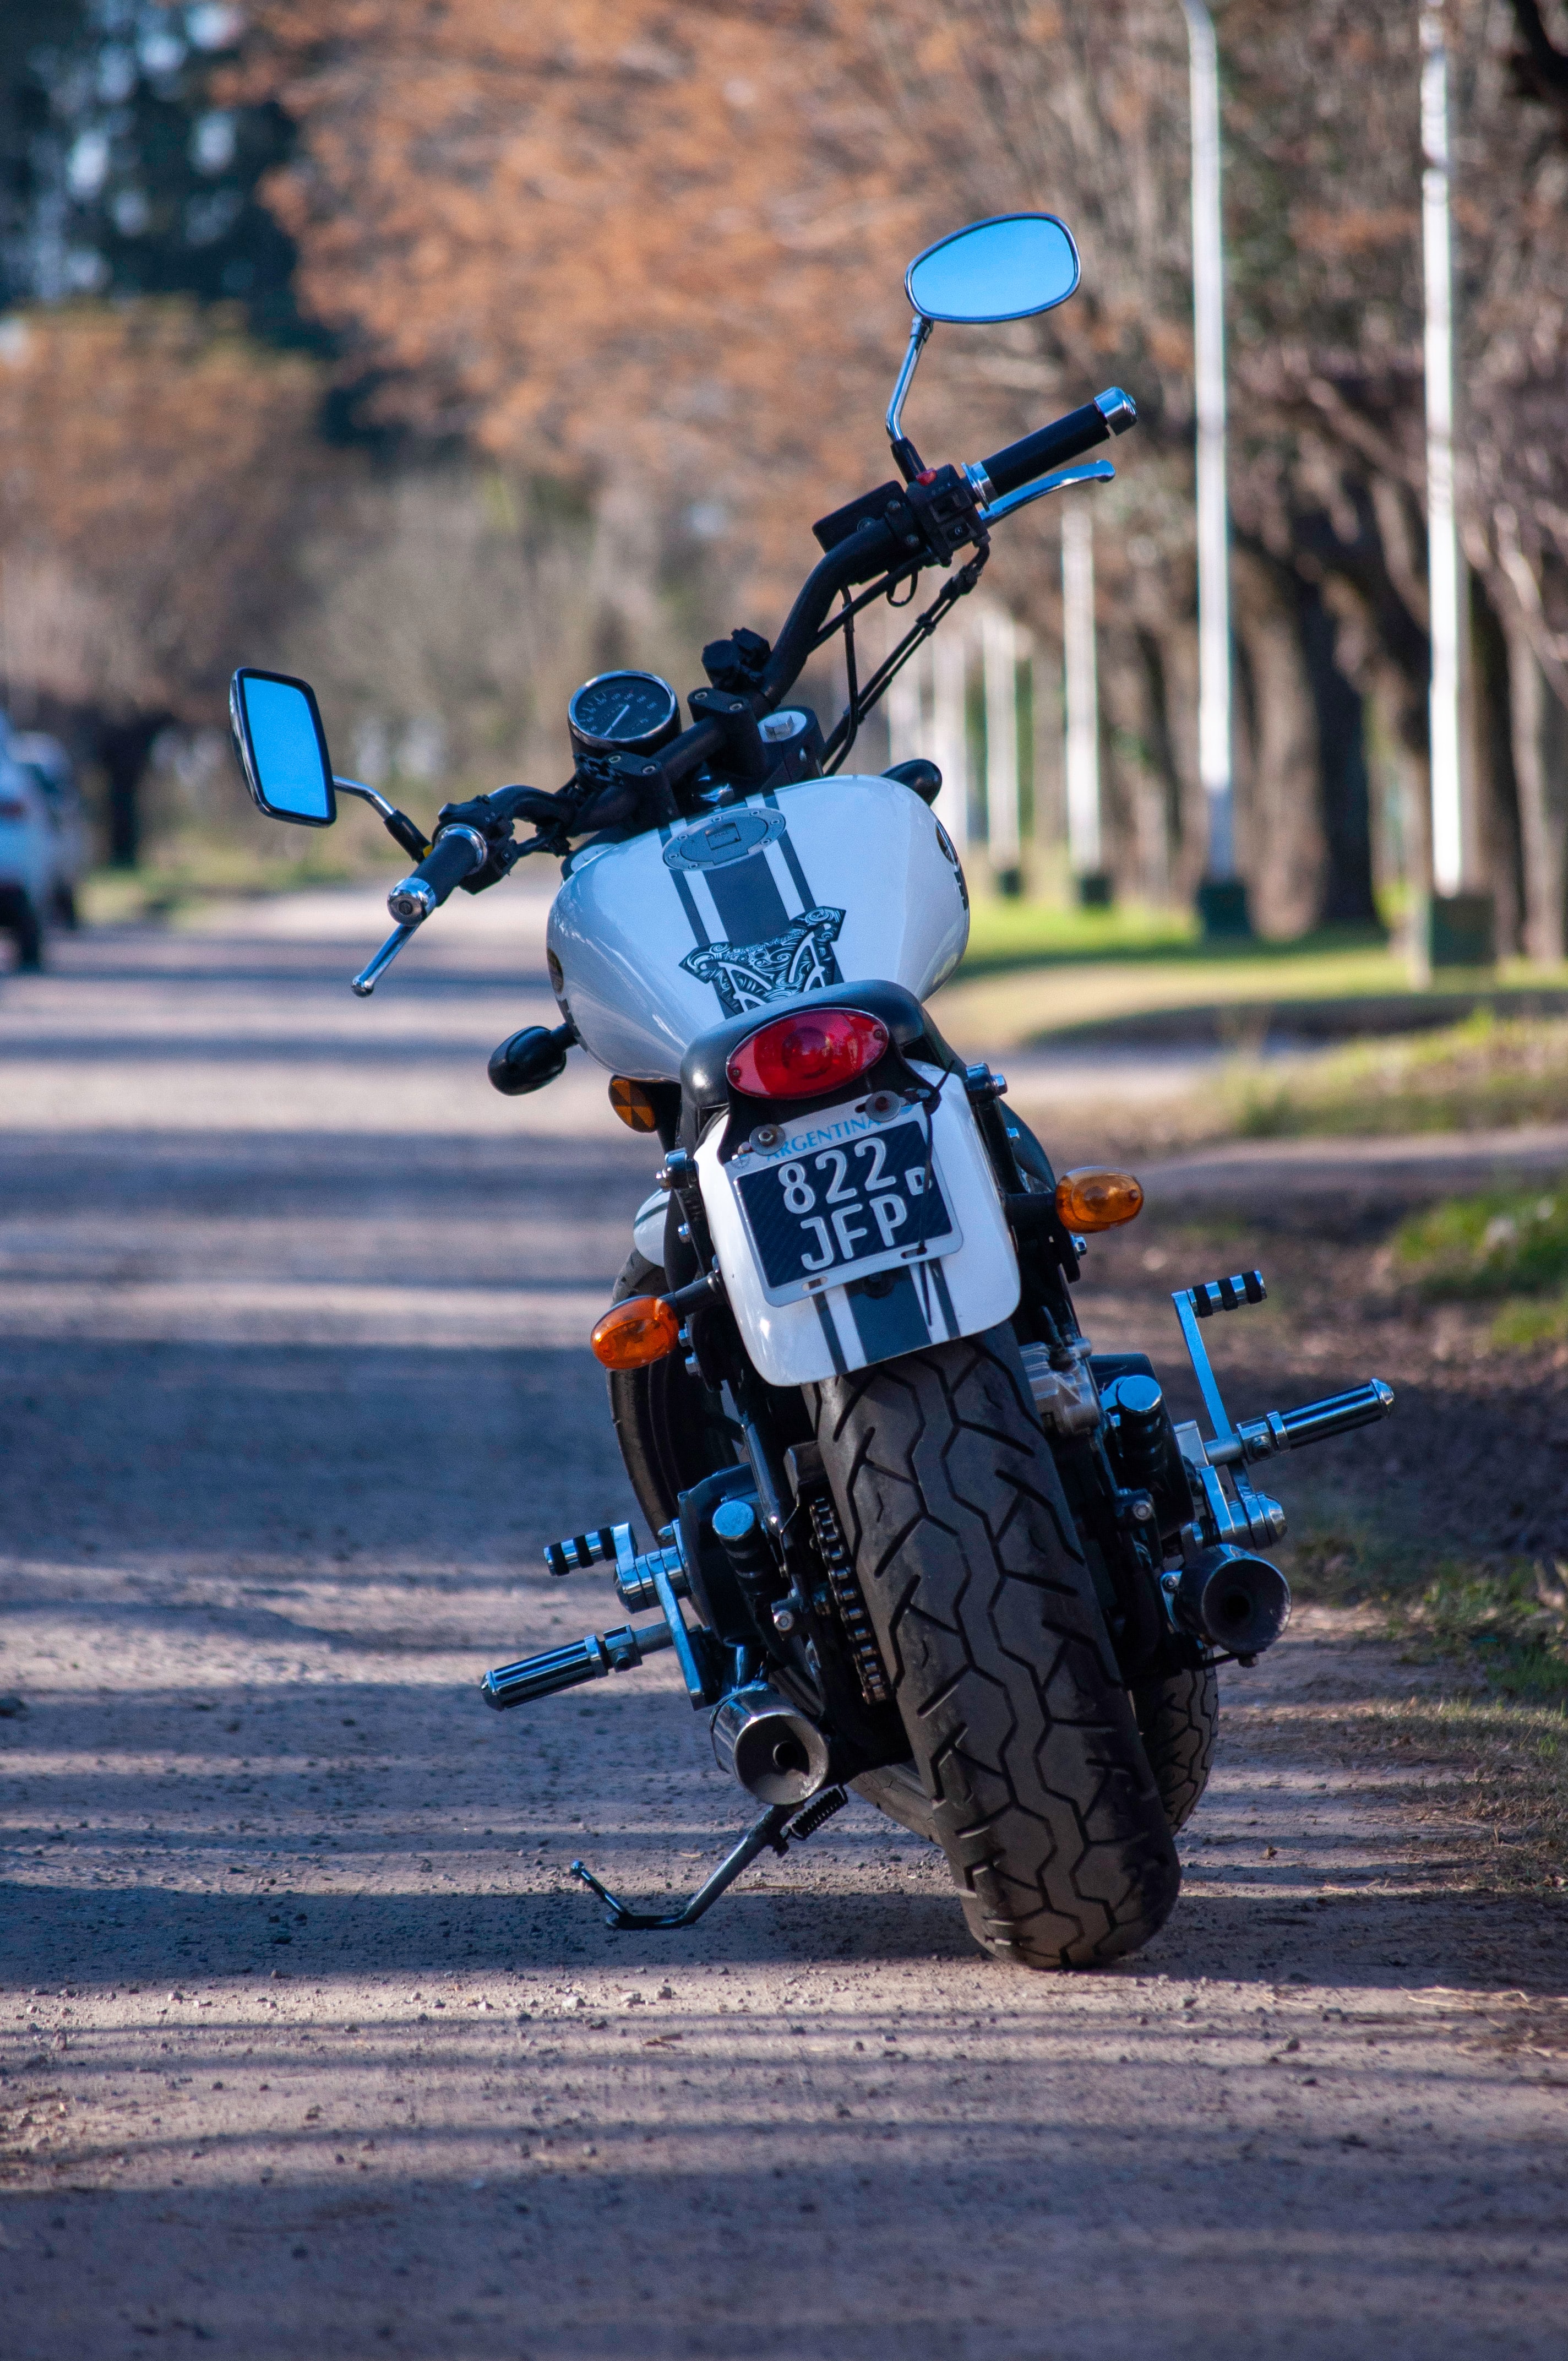 bike, back view, motorcycle, rear view, motorcycles